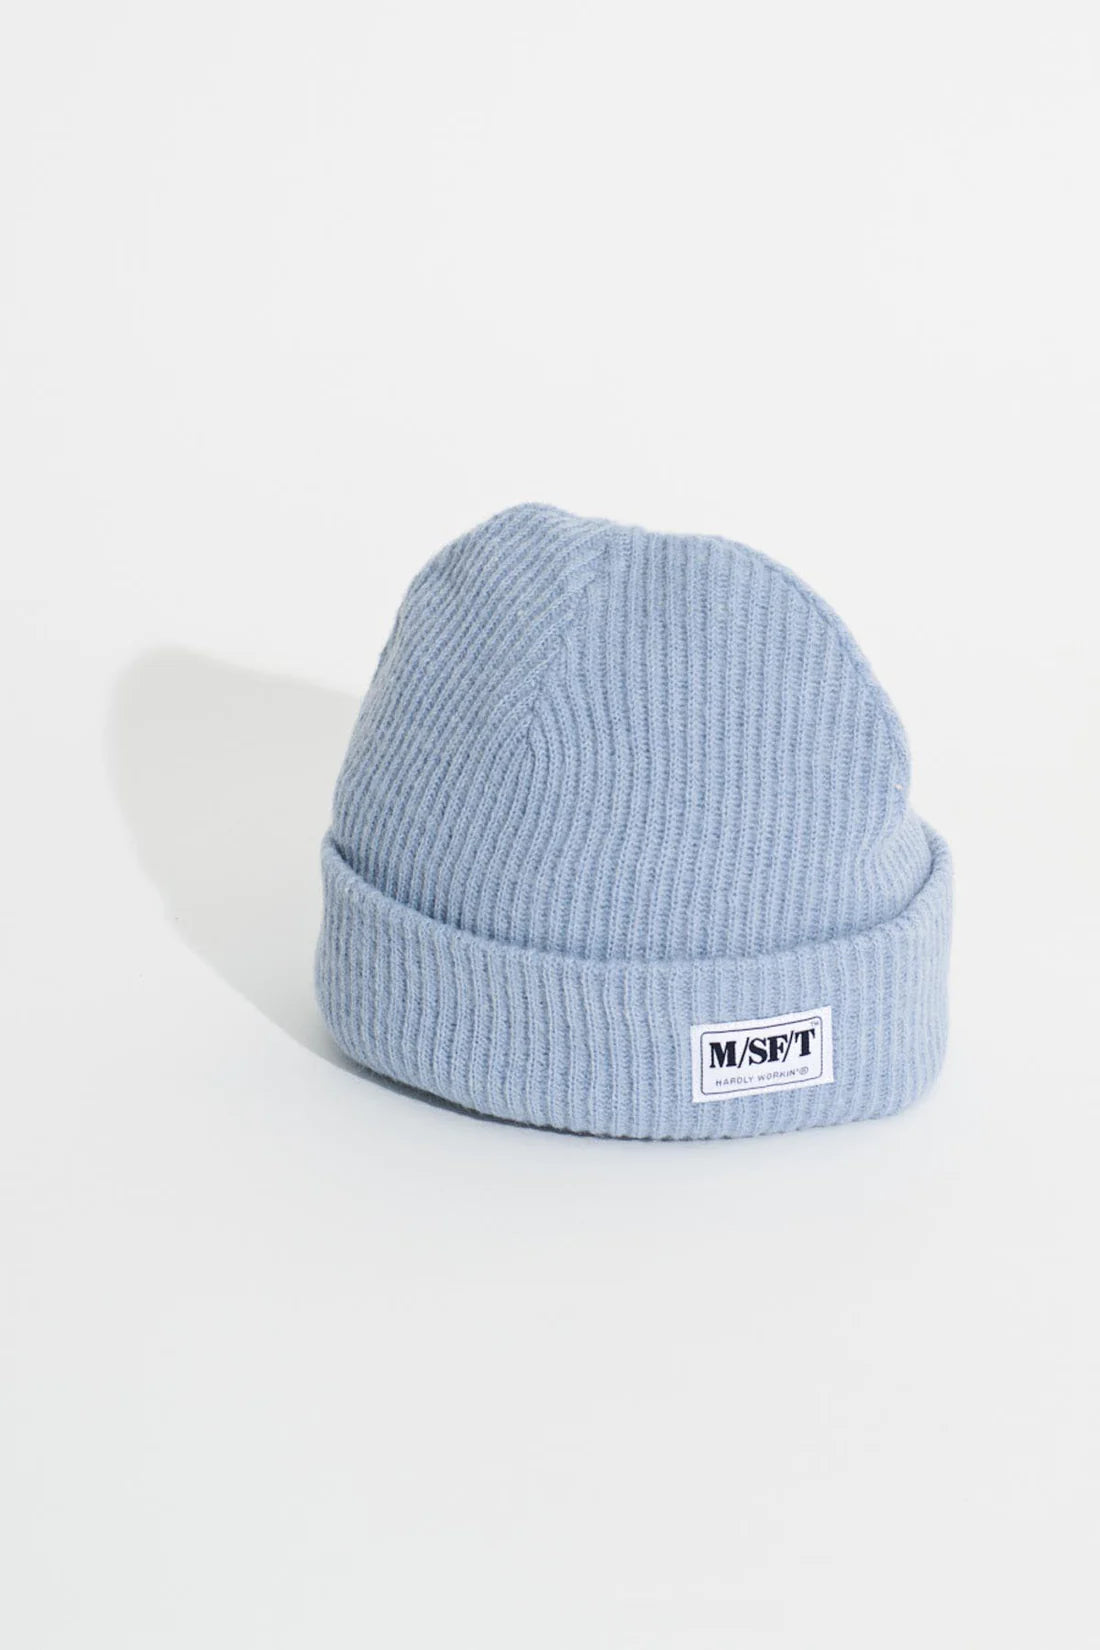 MISFIT // North Stain Beanie DUSTY BLUE